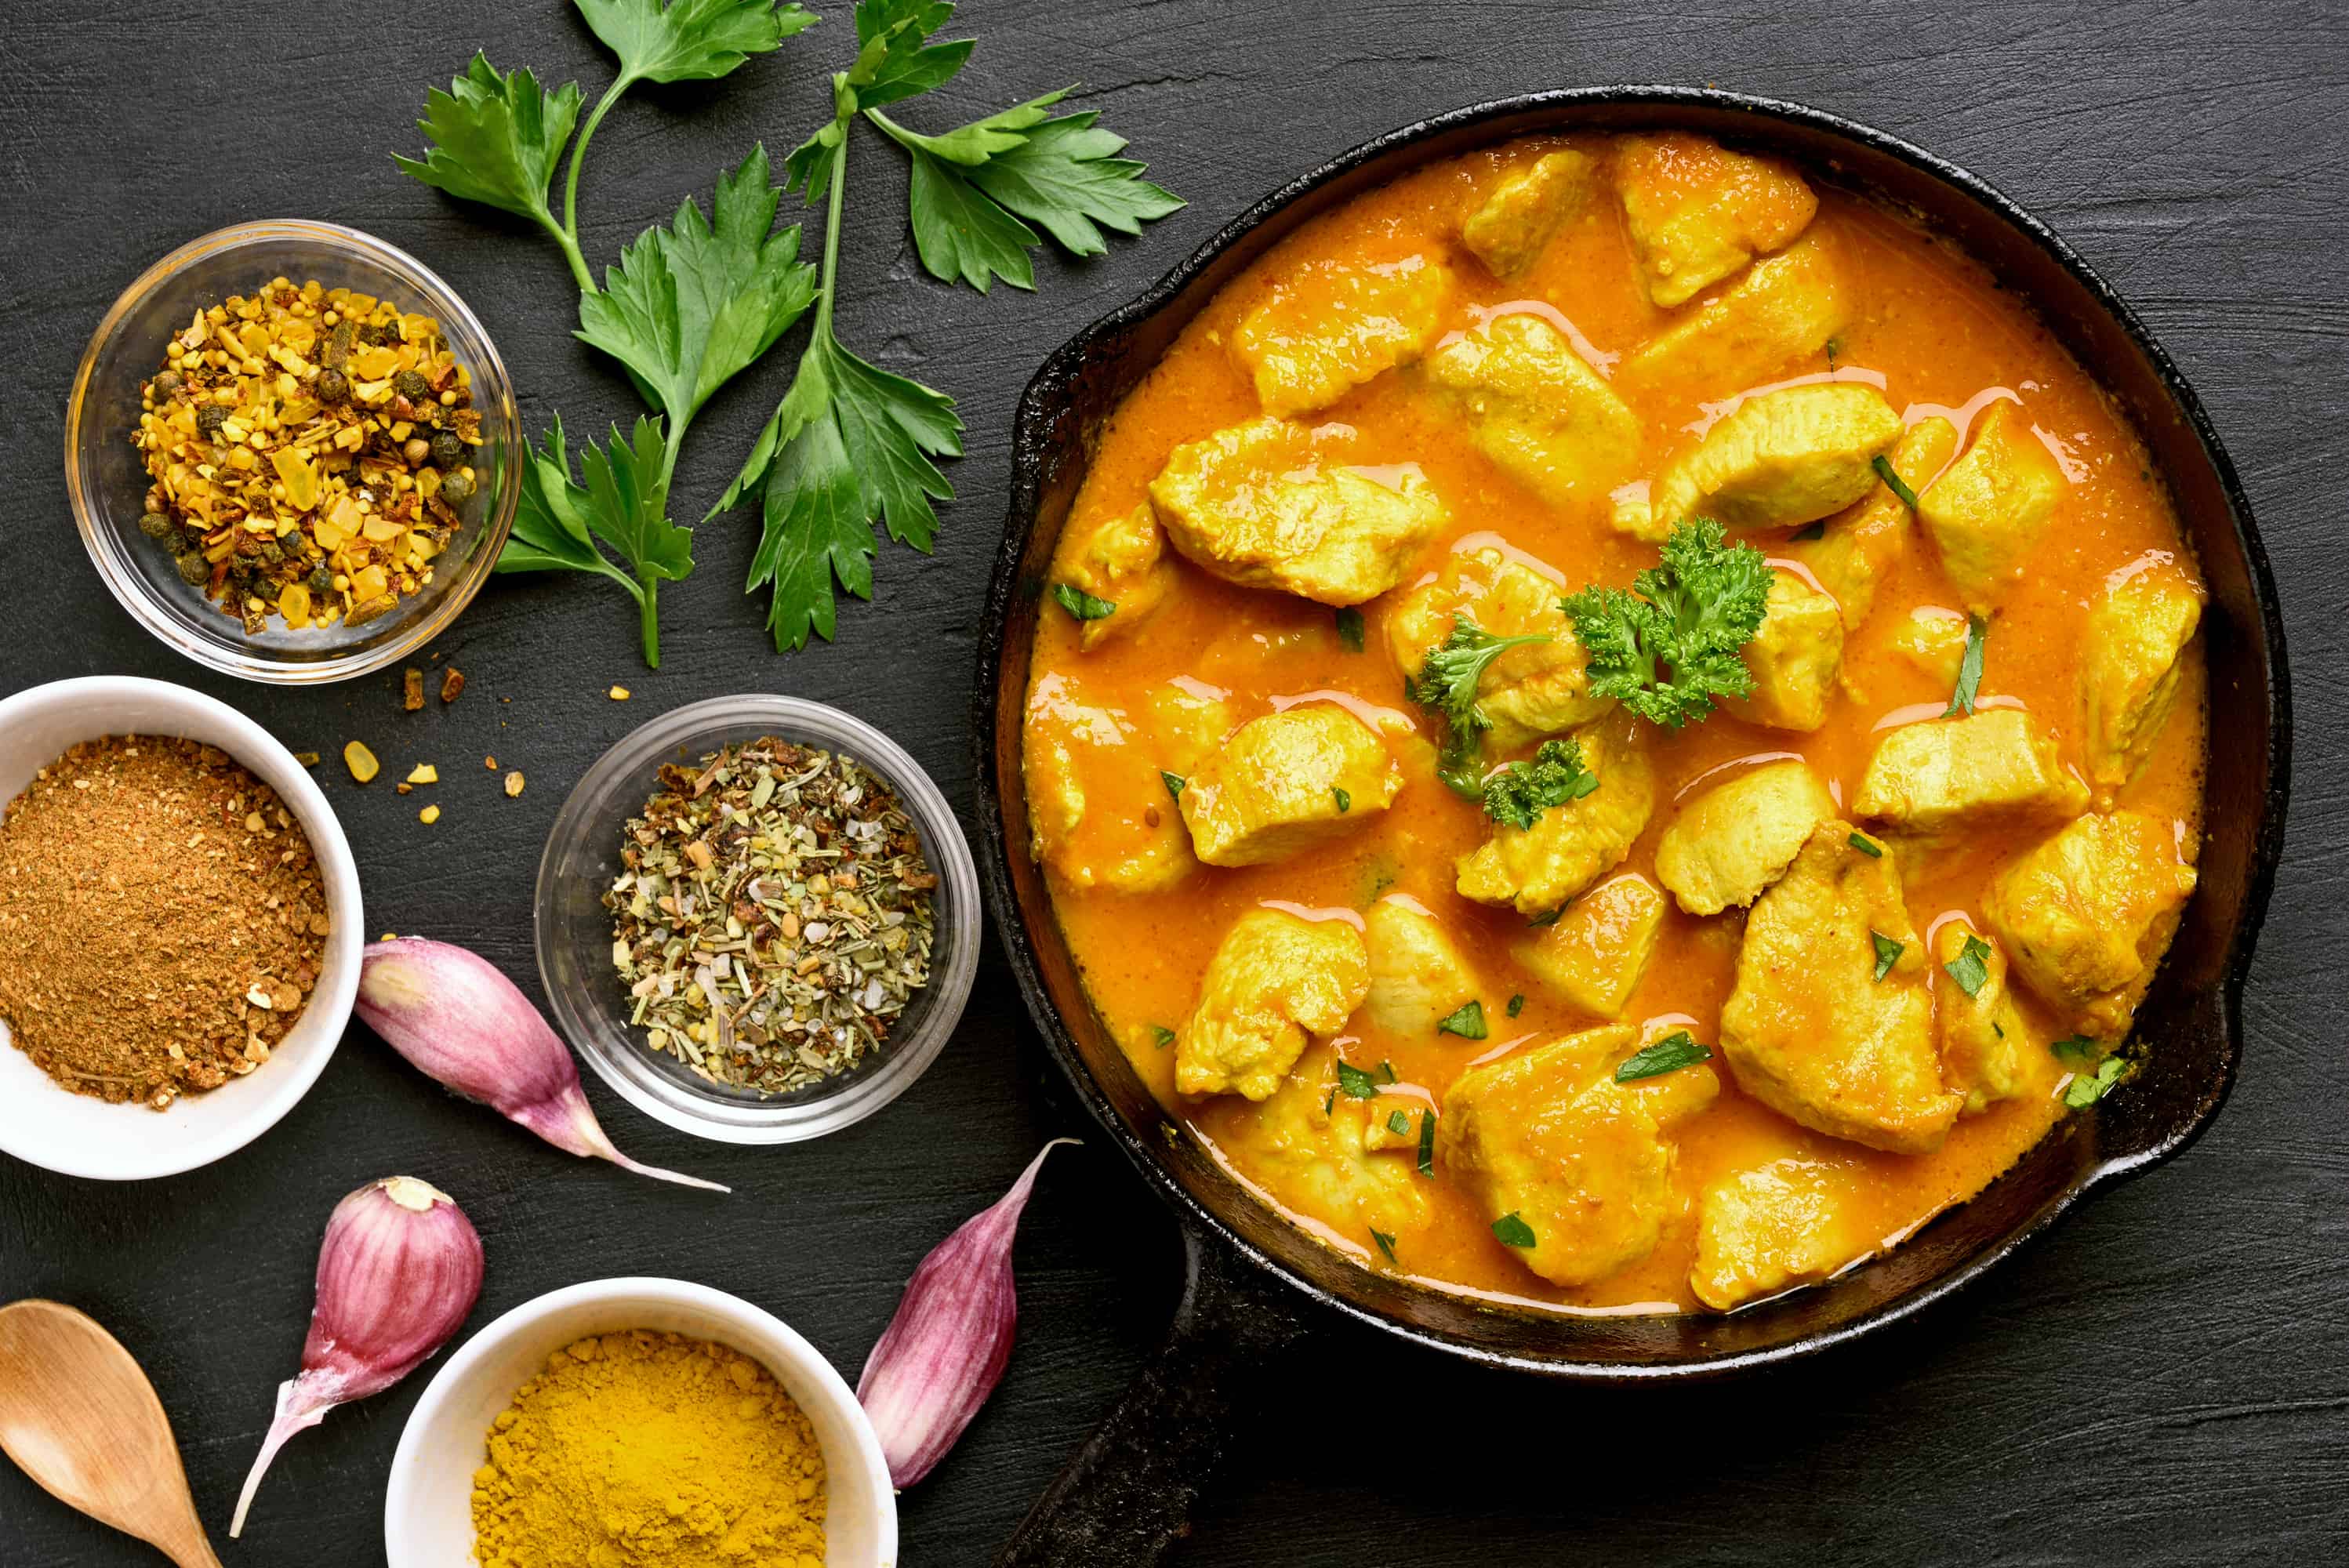 coconut curry chicken that looks fresh and delicious